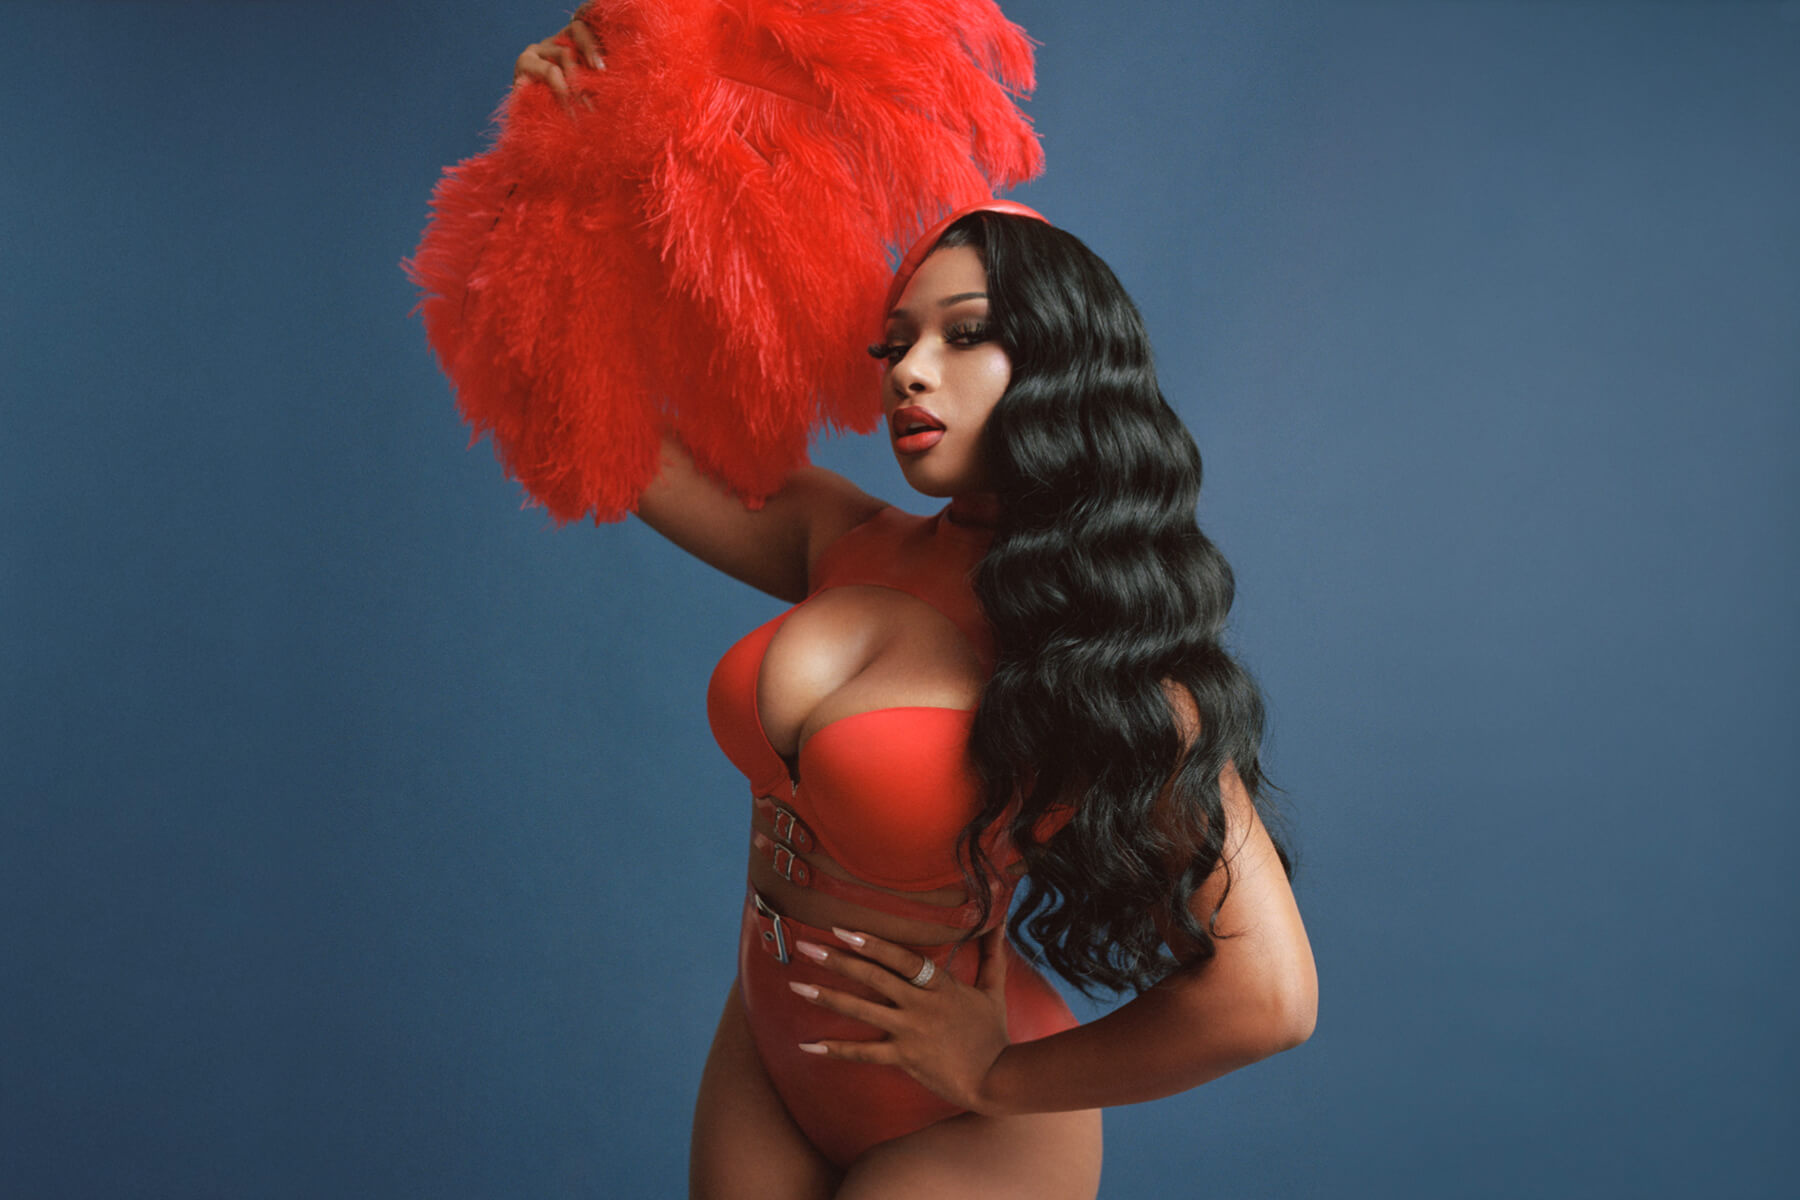 Discover Megan Thee Stallion’s New Clothing Line with Fashion Nova